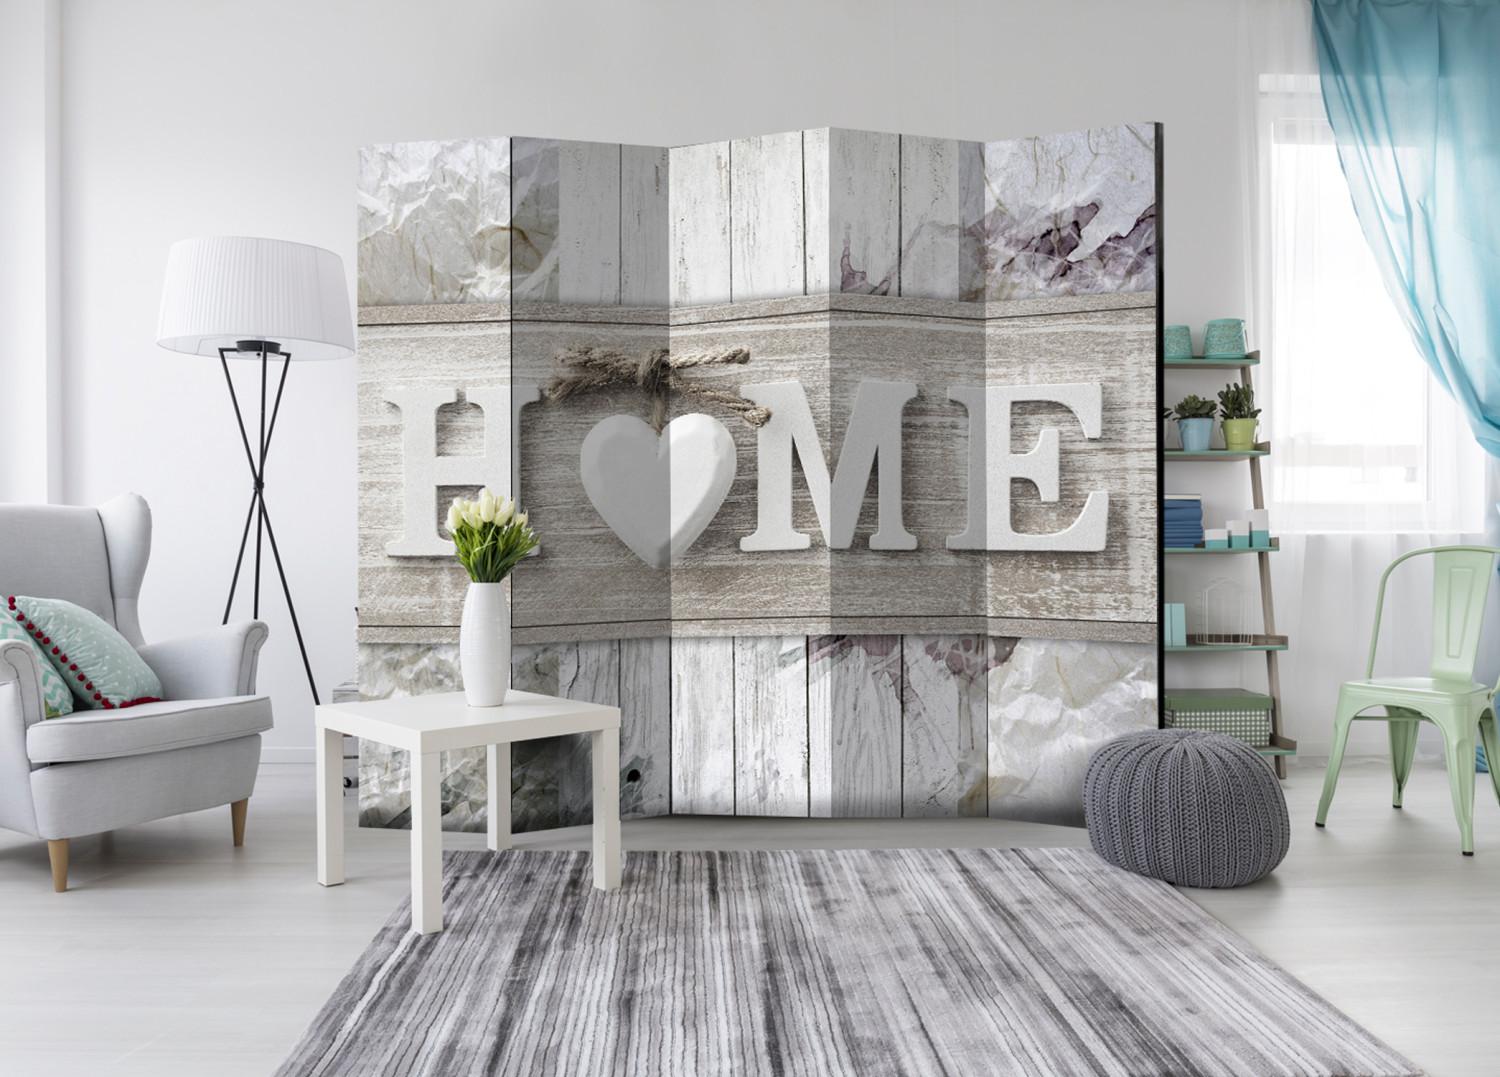 Room Divider Cozy Home (5-piece) - English text on a wooden background